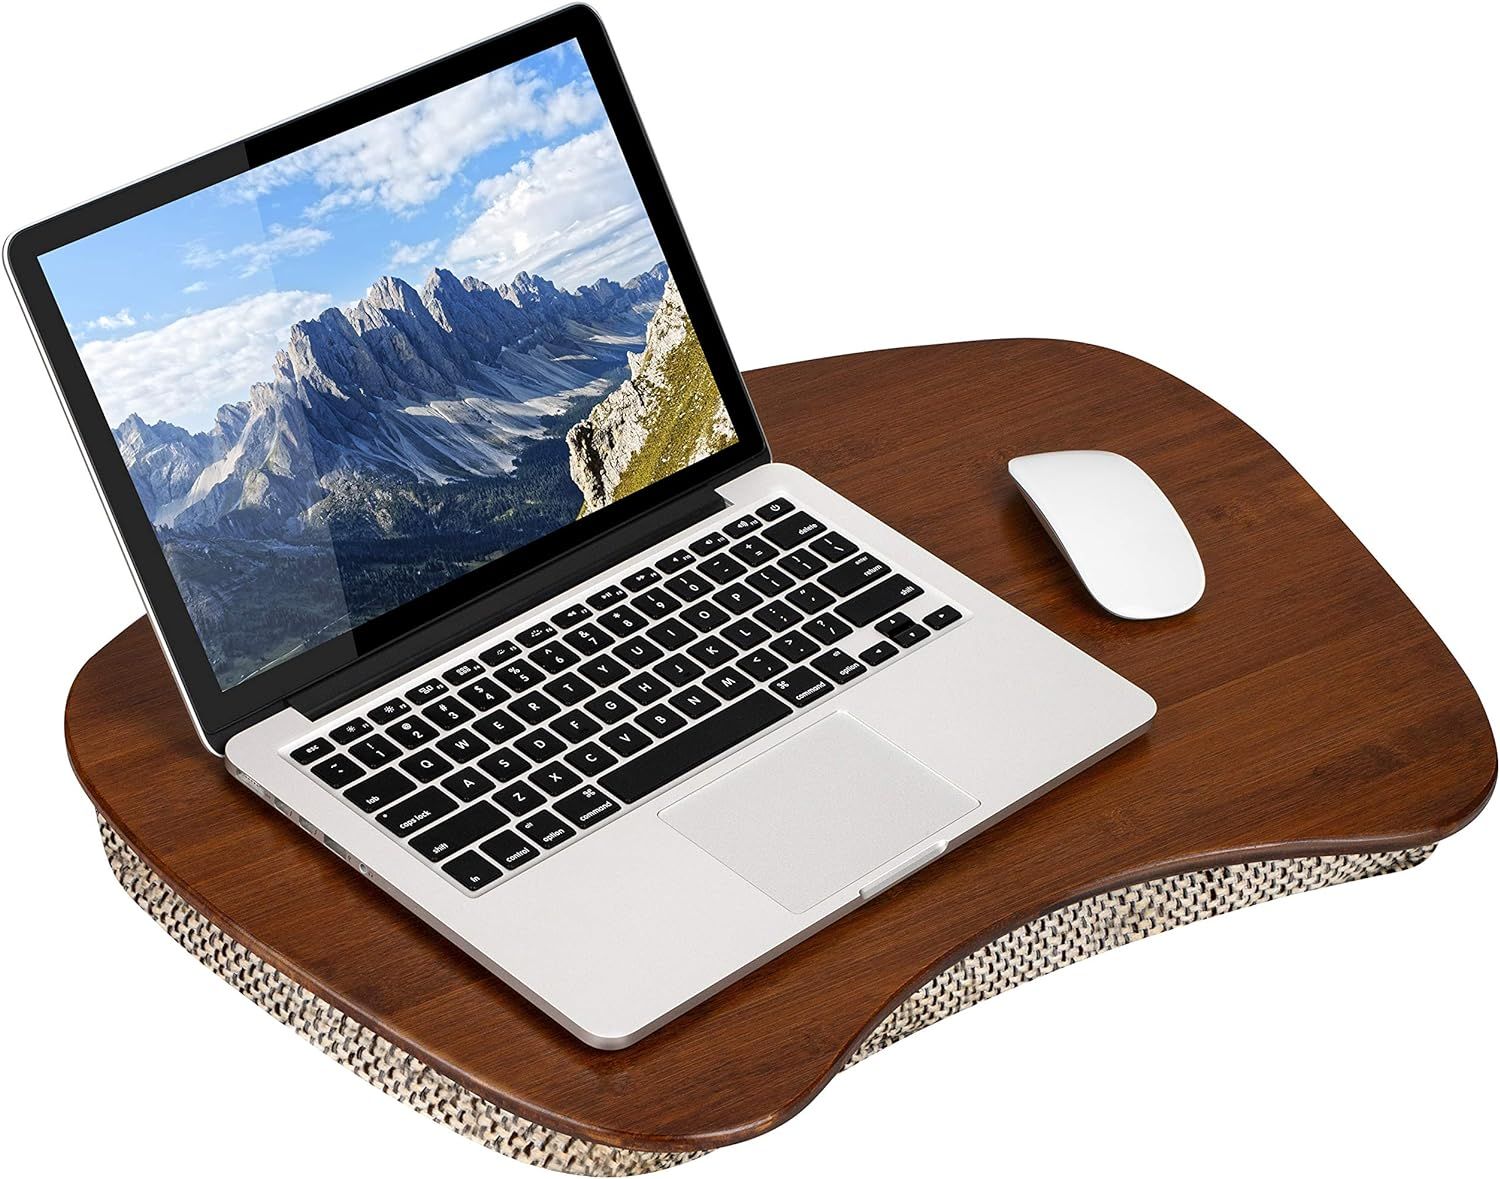 LapGear Bamboo Lap Desk - Chestnut Bamboo - Fits up to 17.3 Inch Laptops - Style No. 91692 | Amazon (US)